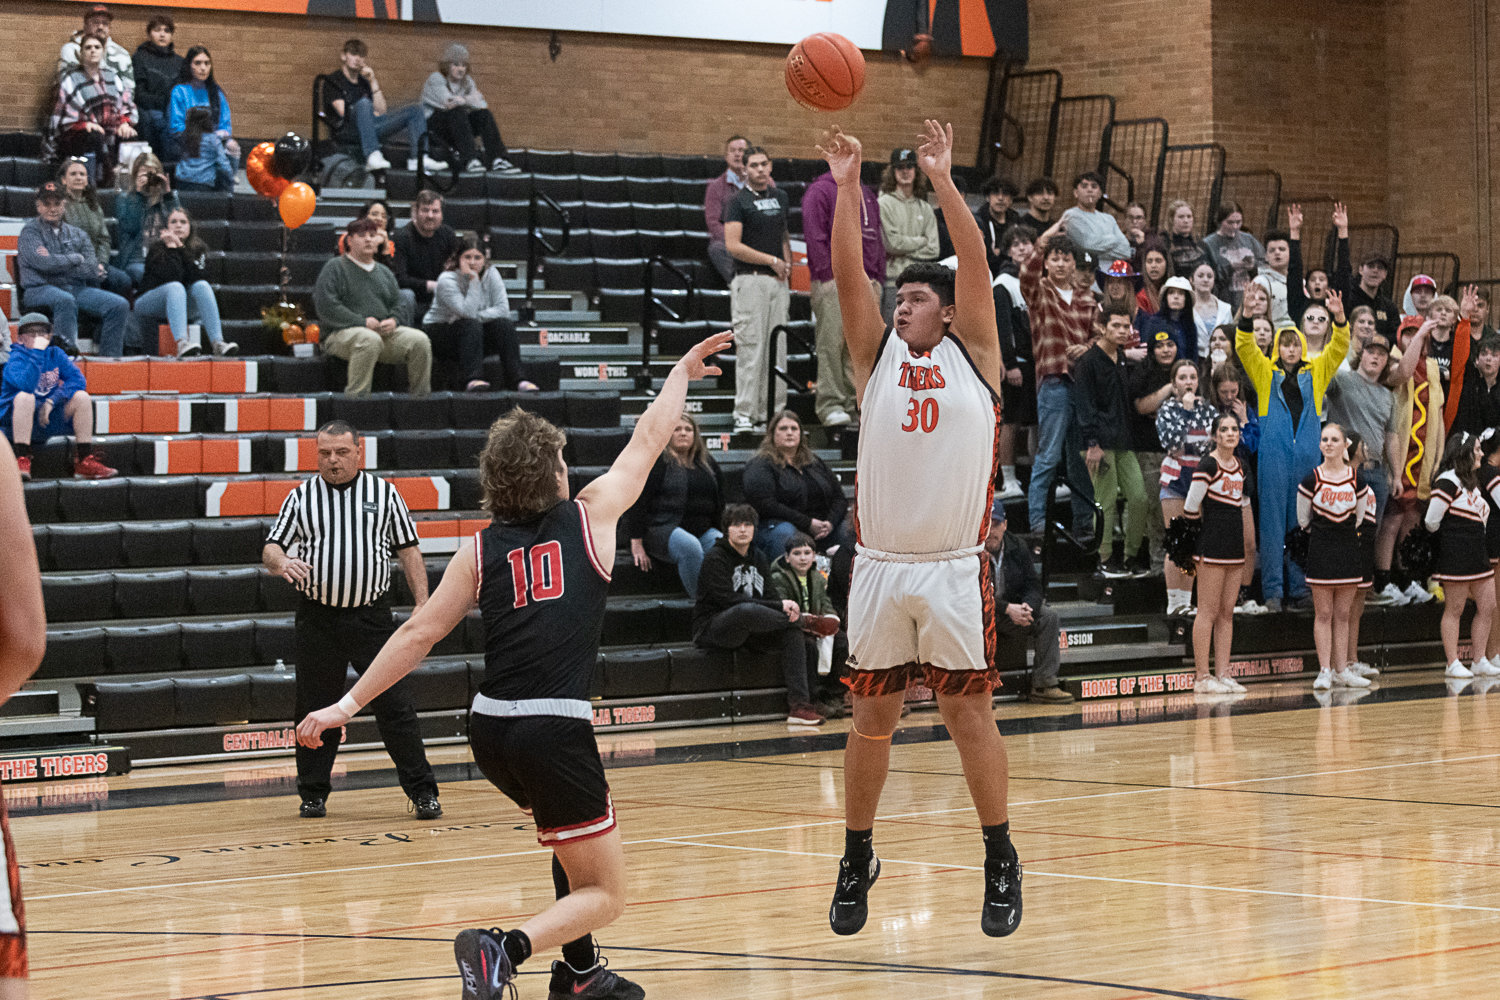 Carlos Vallejo launches a 3-pointer during the first quarter of Centralia's loss to Shelton on Feb. 2.